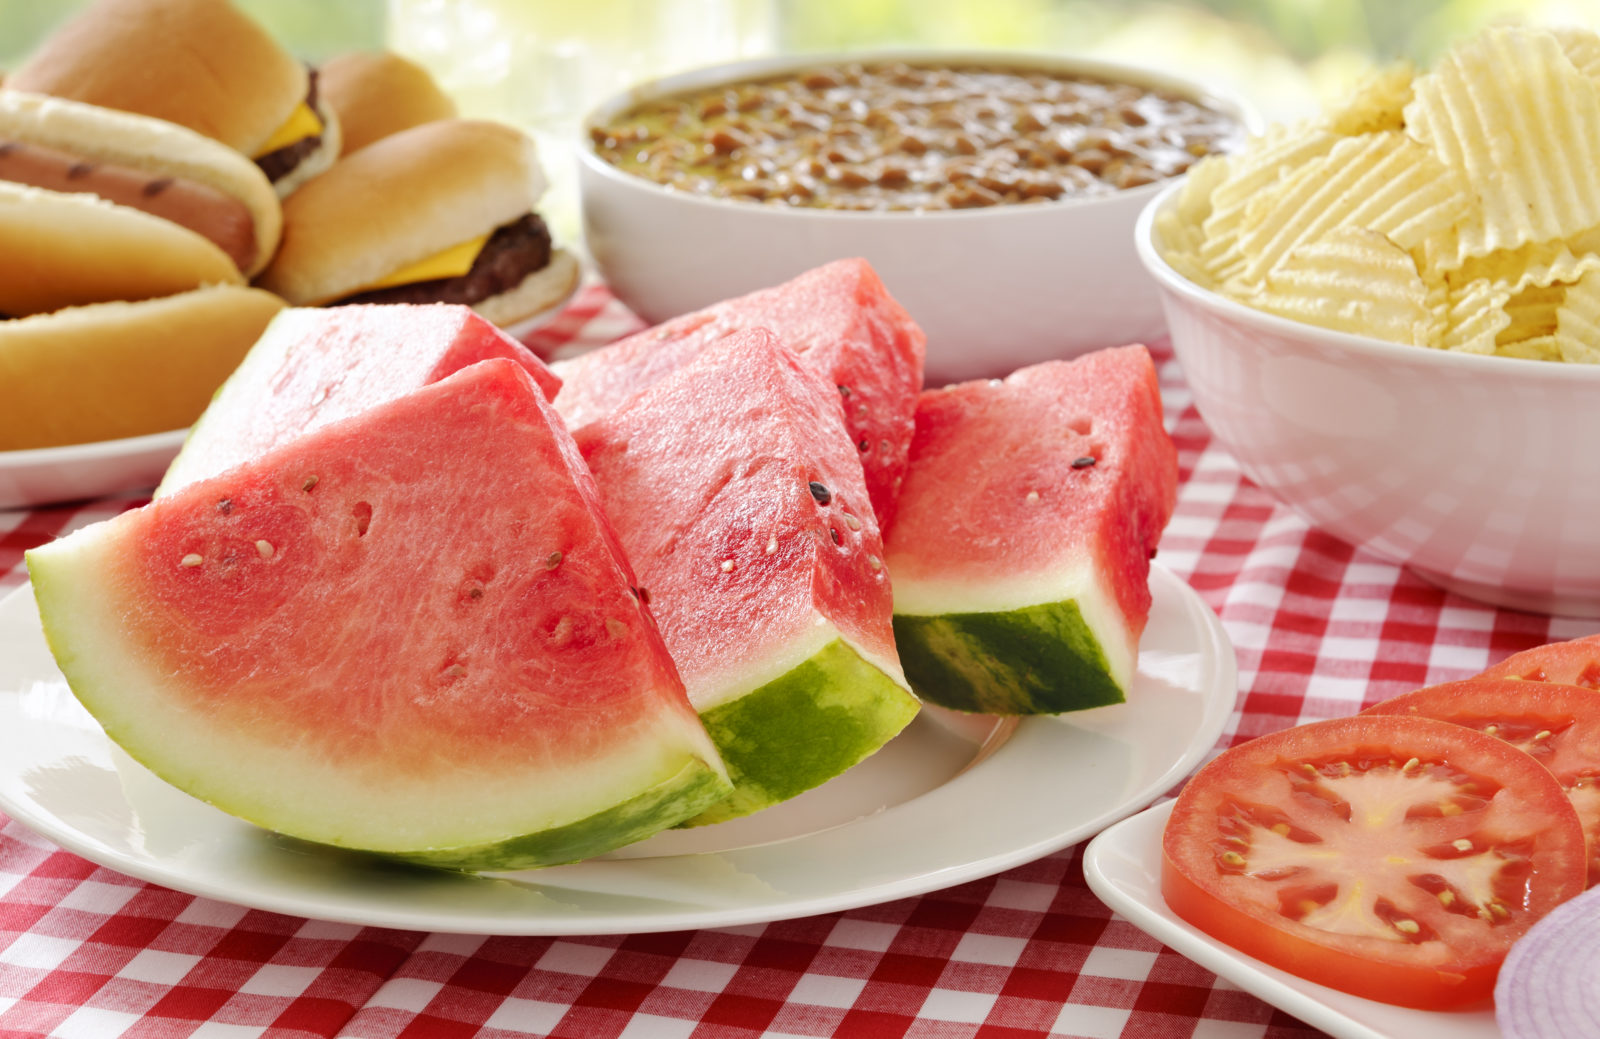 picnic table set with slices of watermelon and summer food favorites like chips and dip and hamburgers